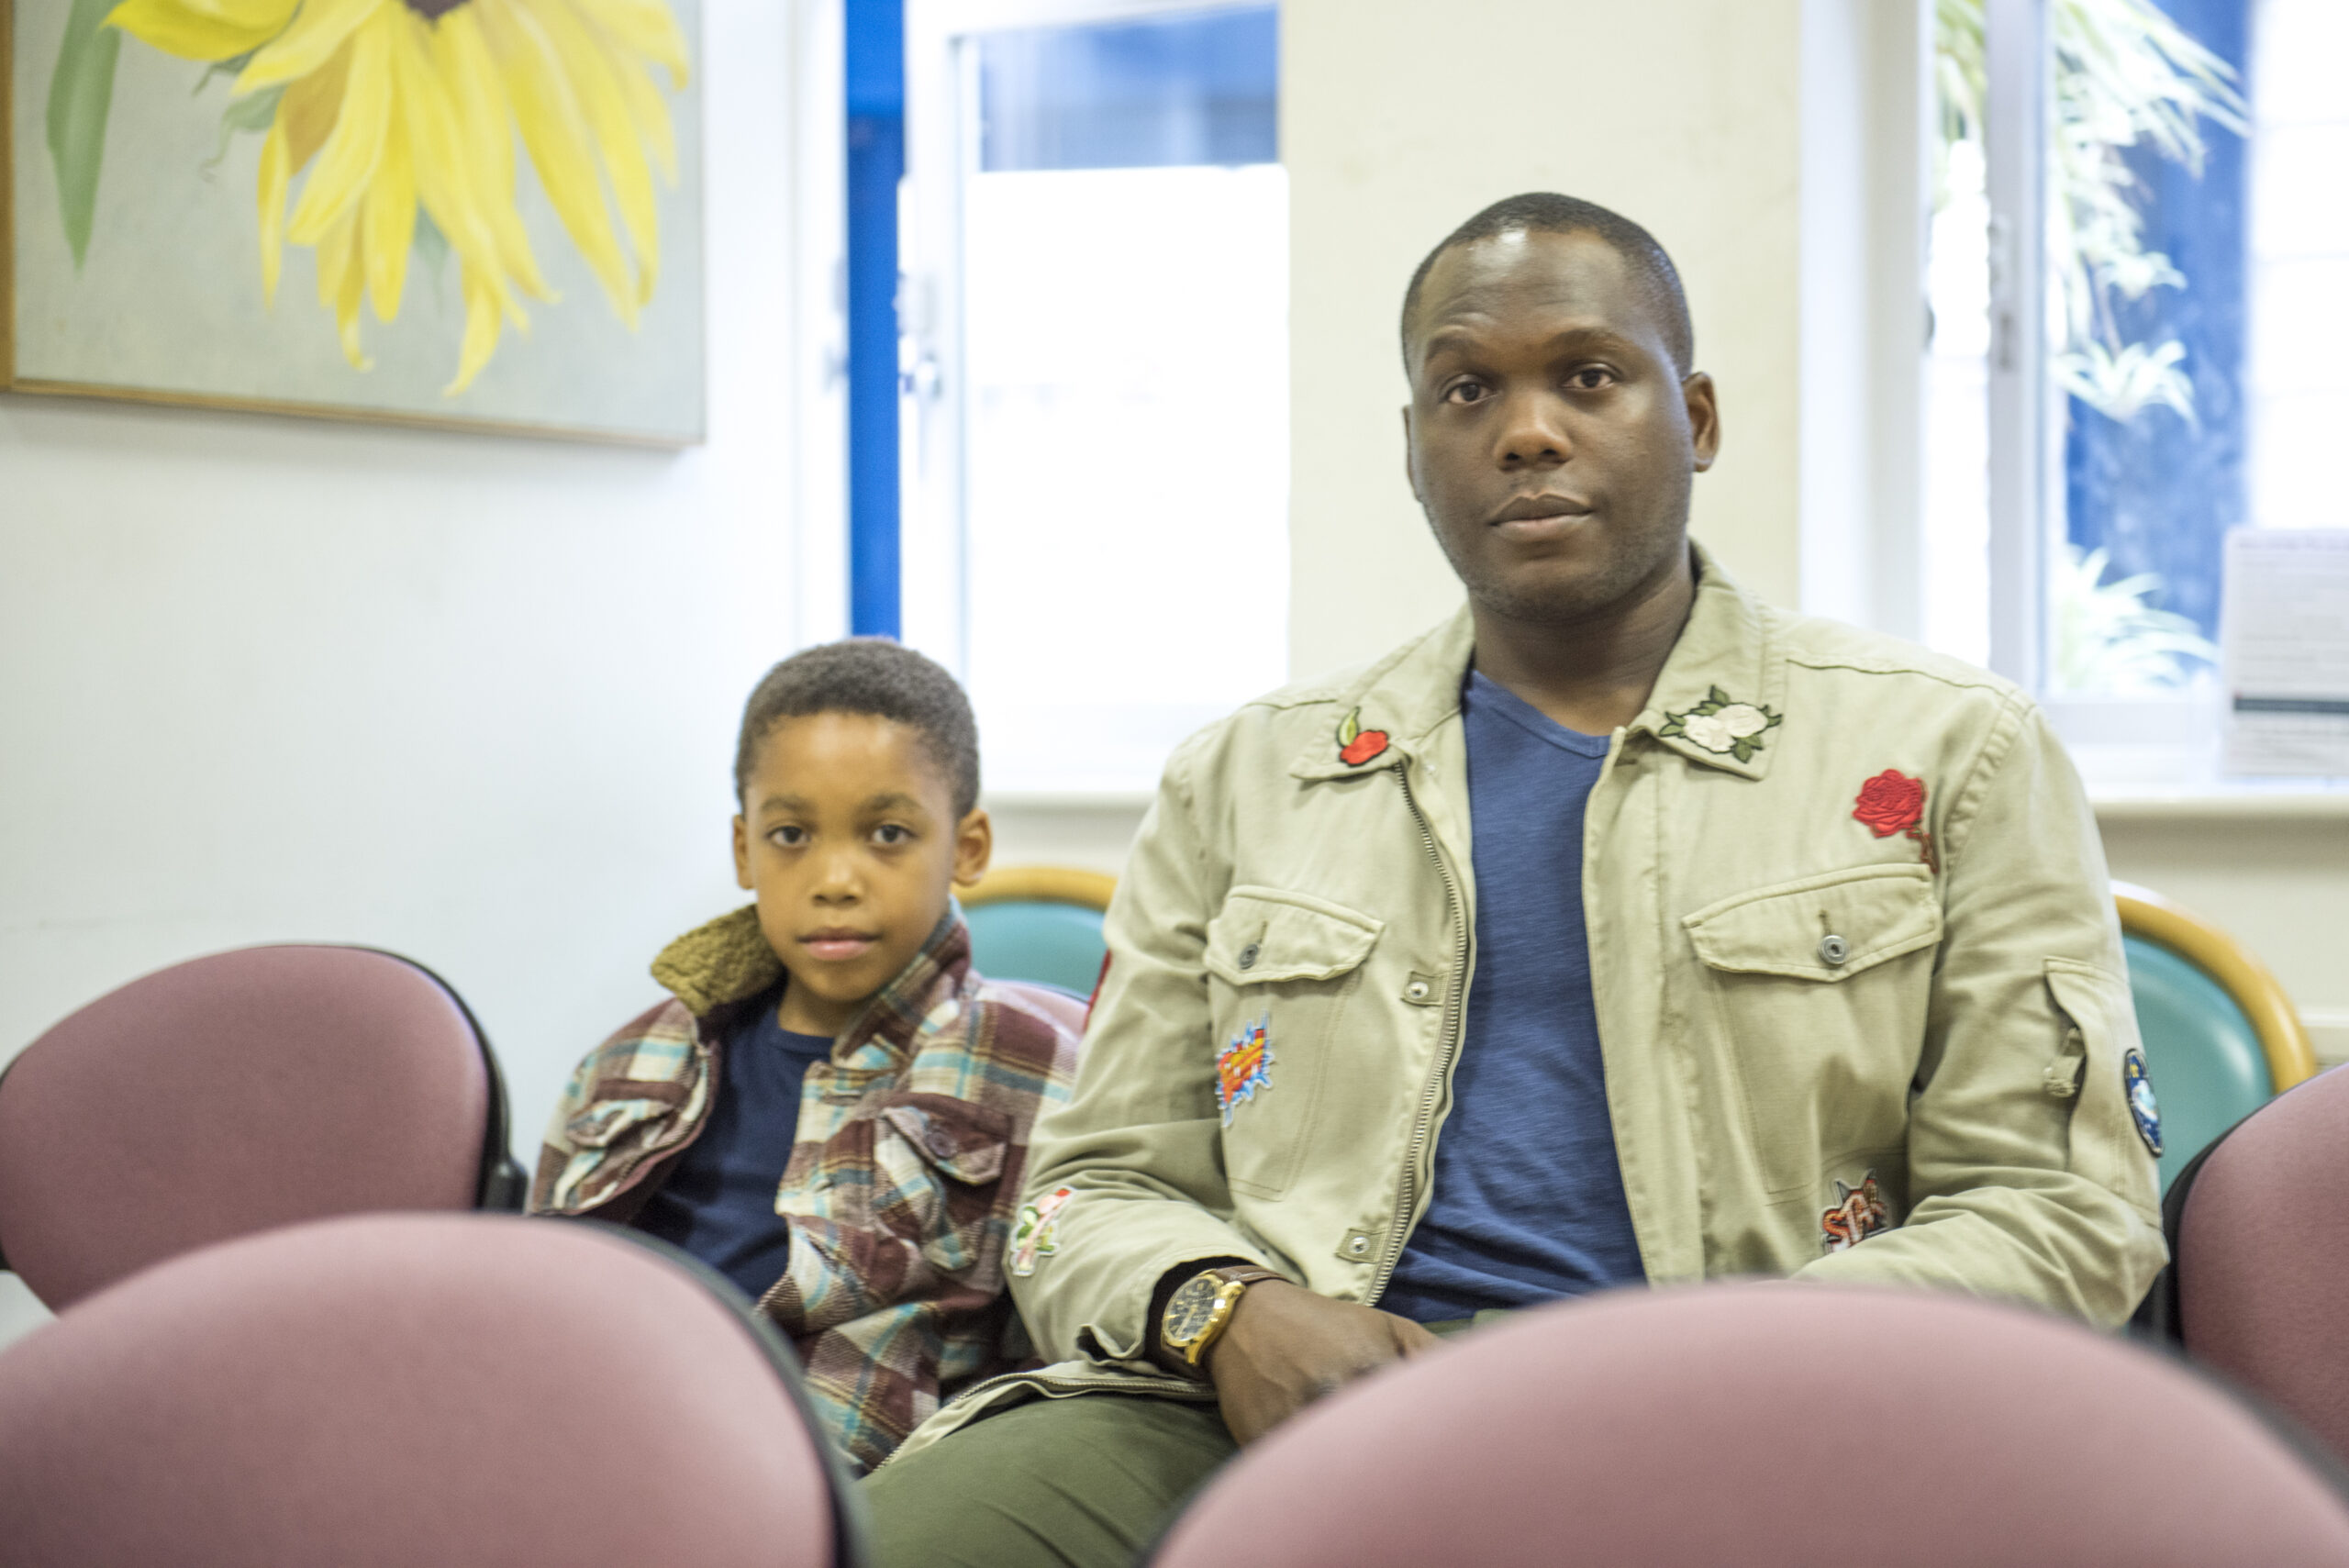 Father and son in waiting room looking concerned